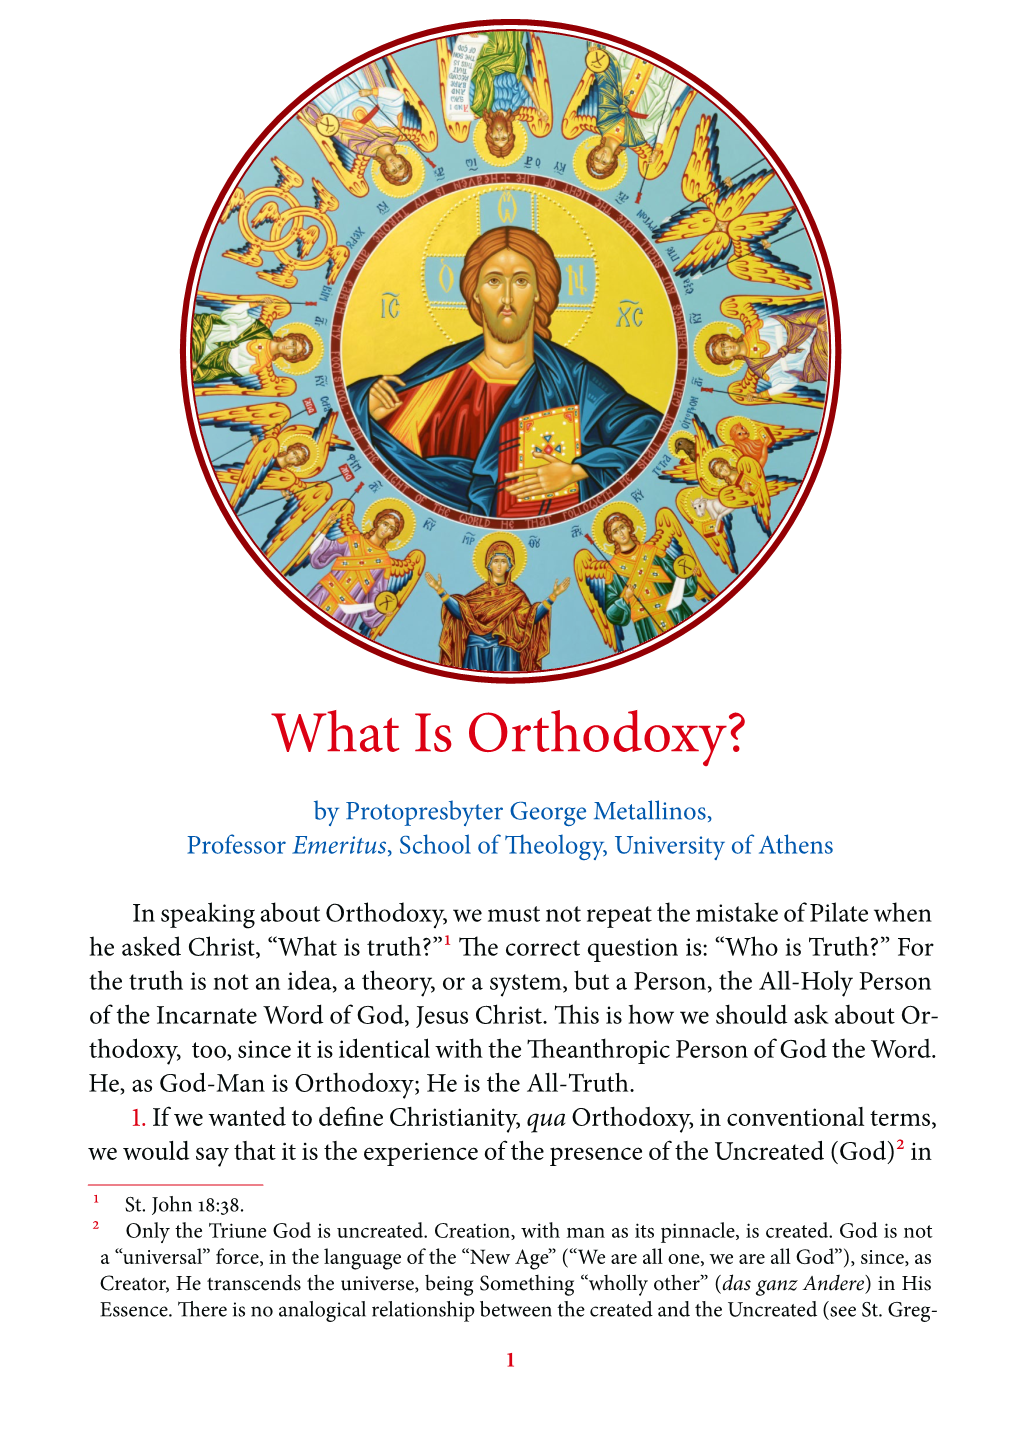 What Is Orthodoxy?